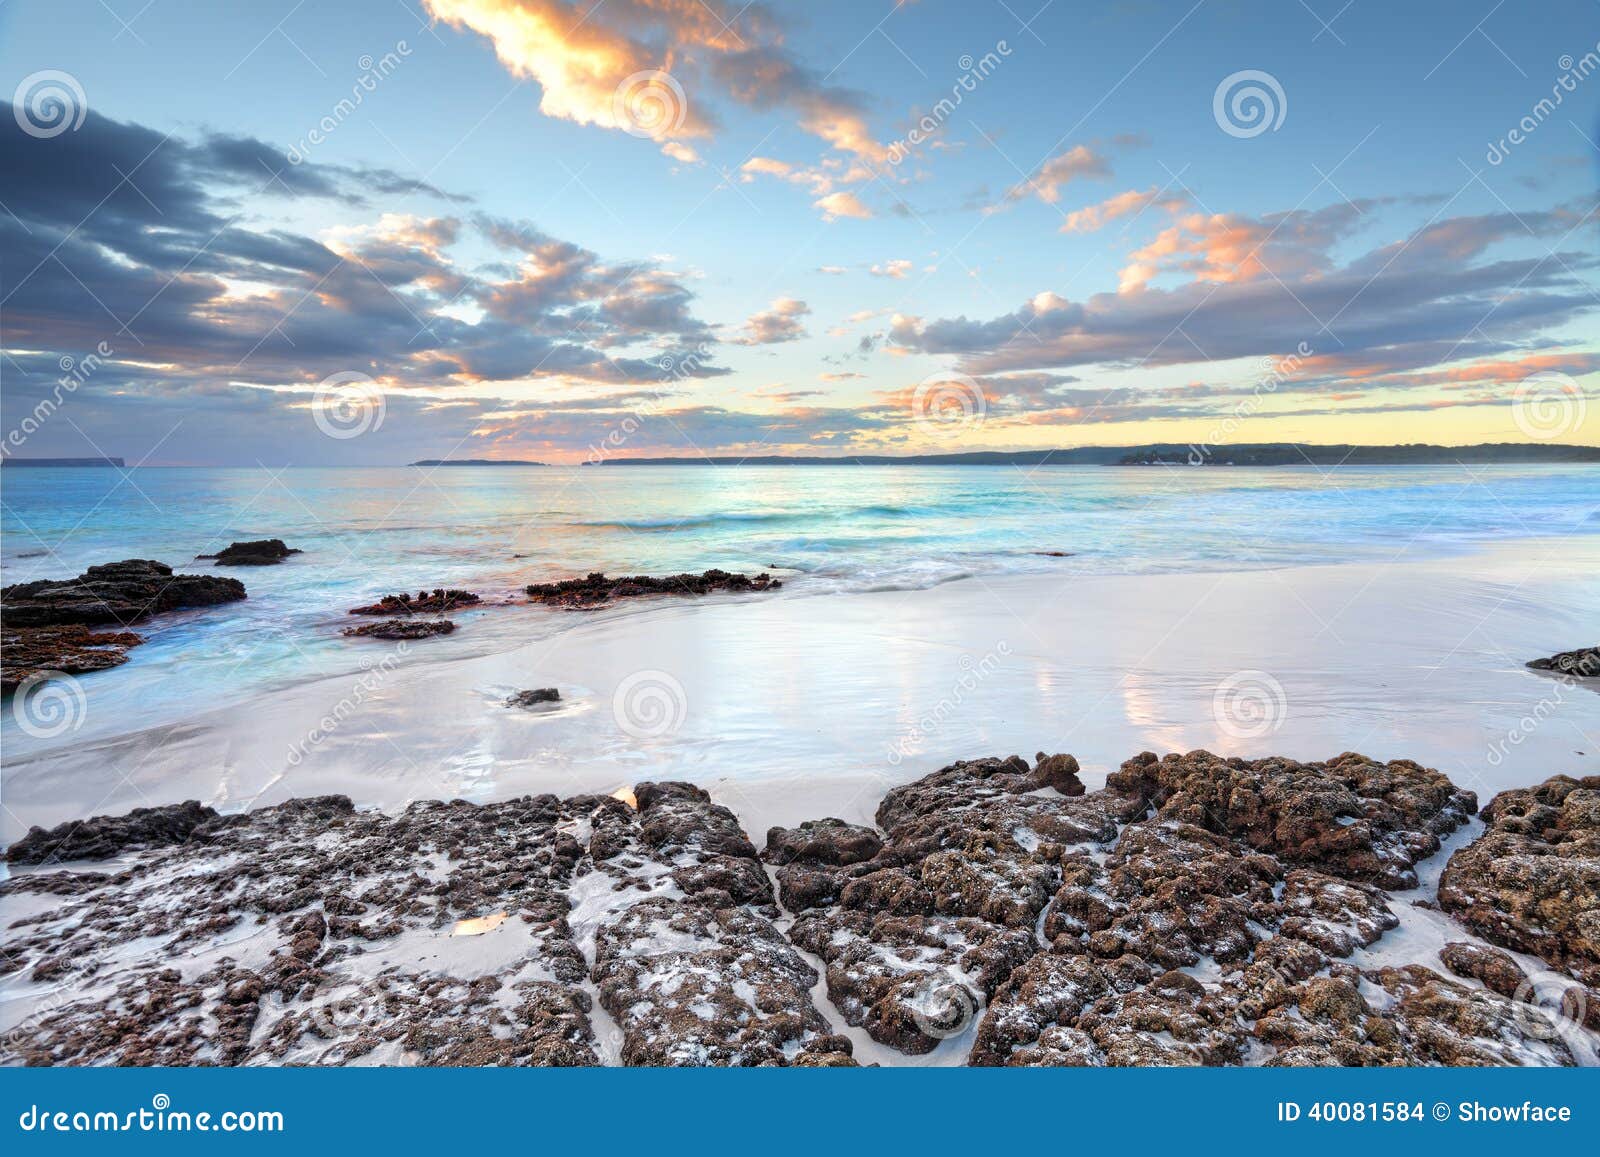 dawn colours at jervis bay nsw australia